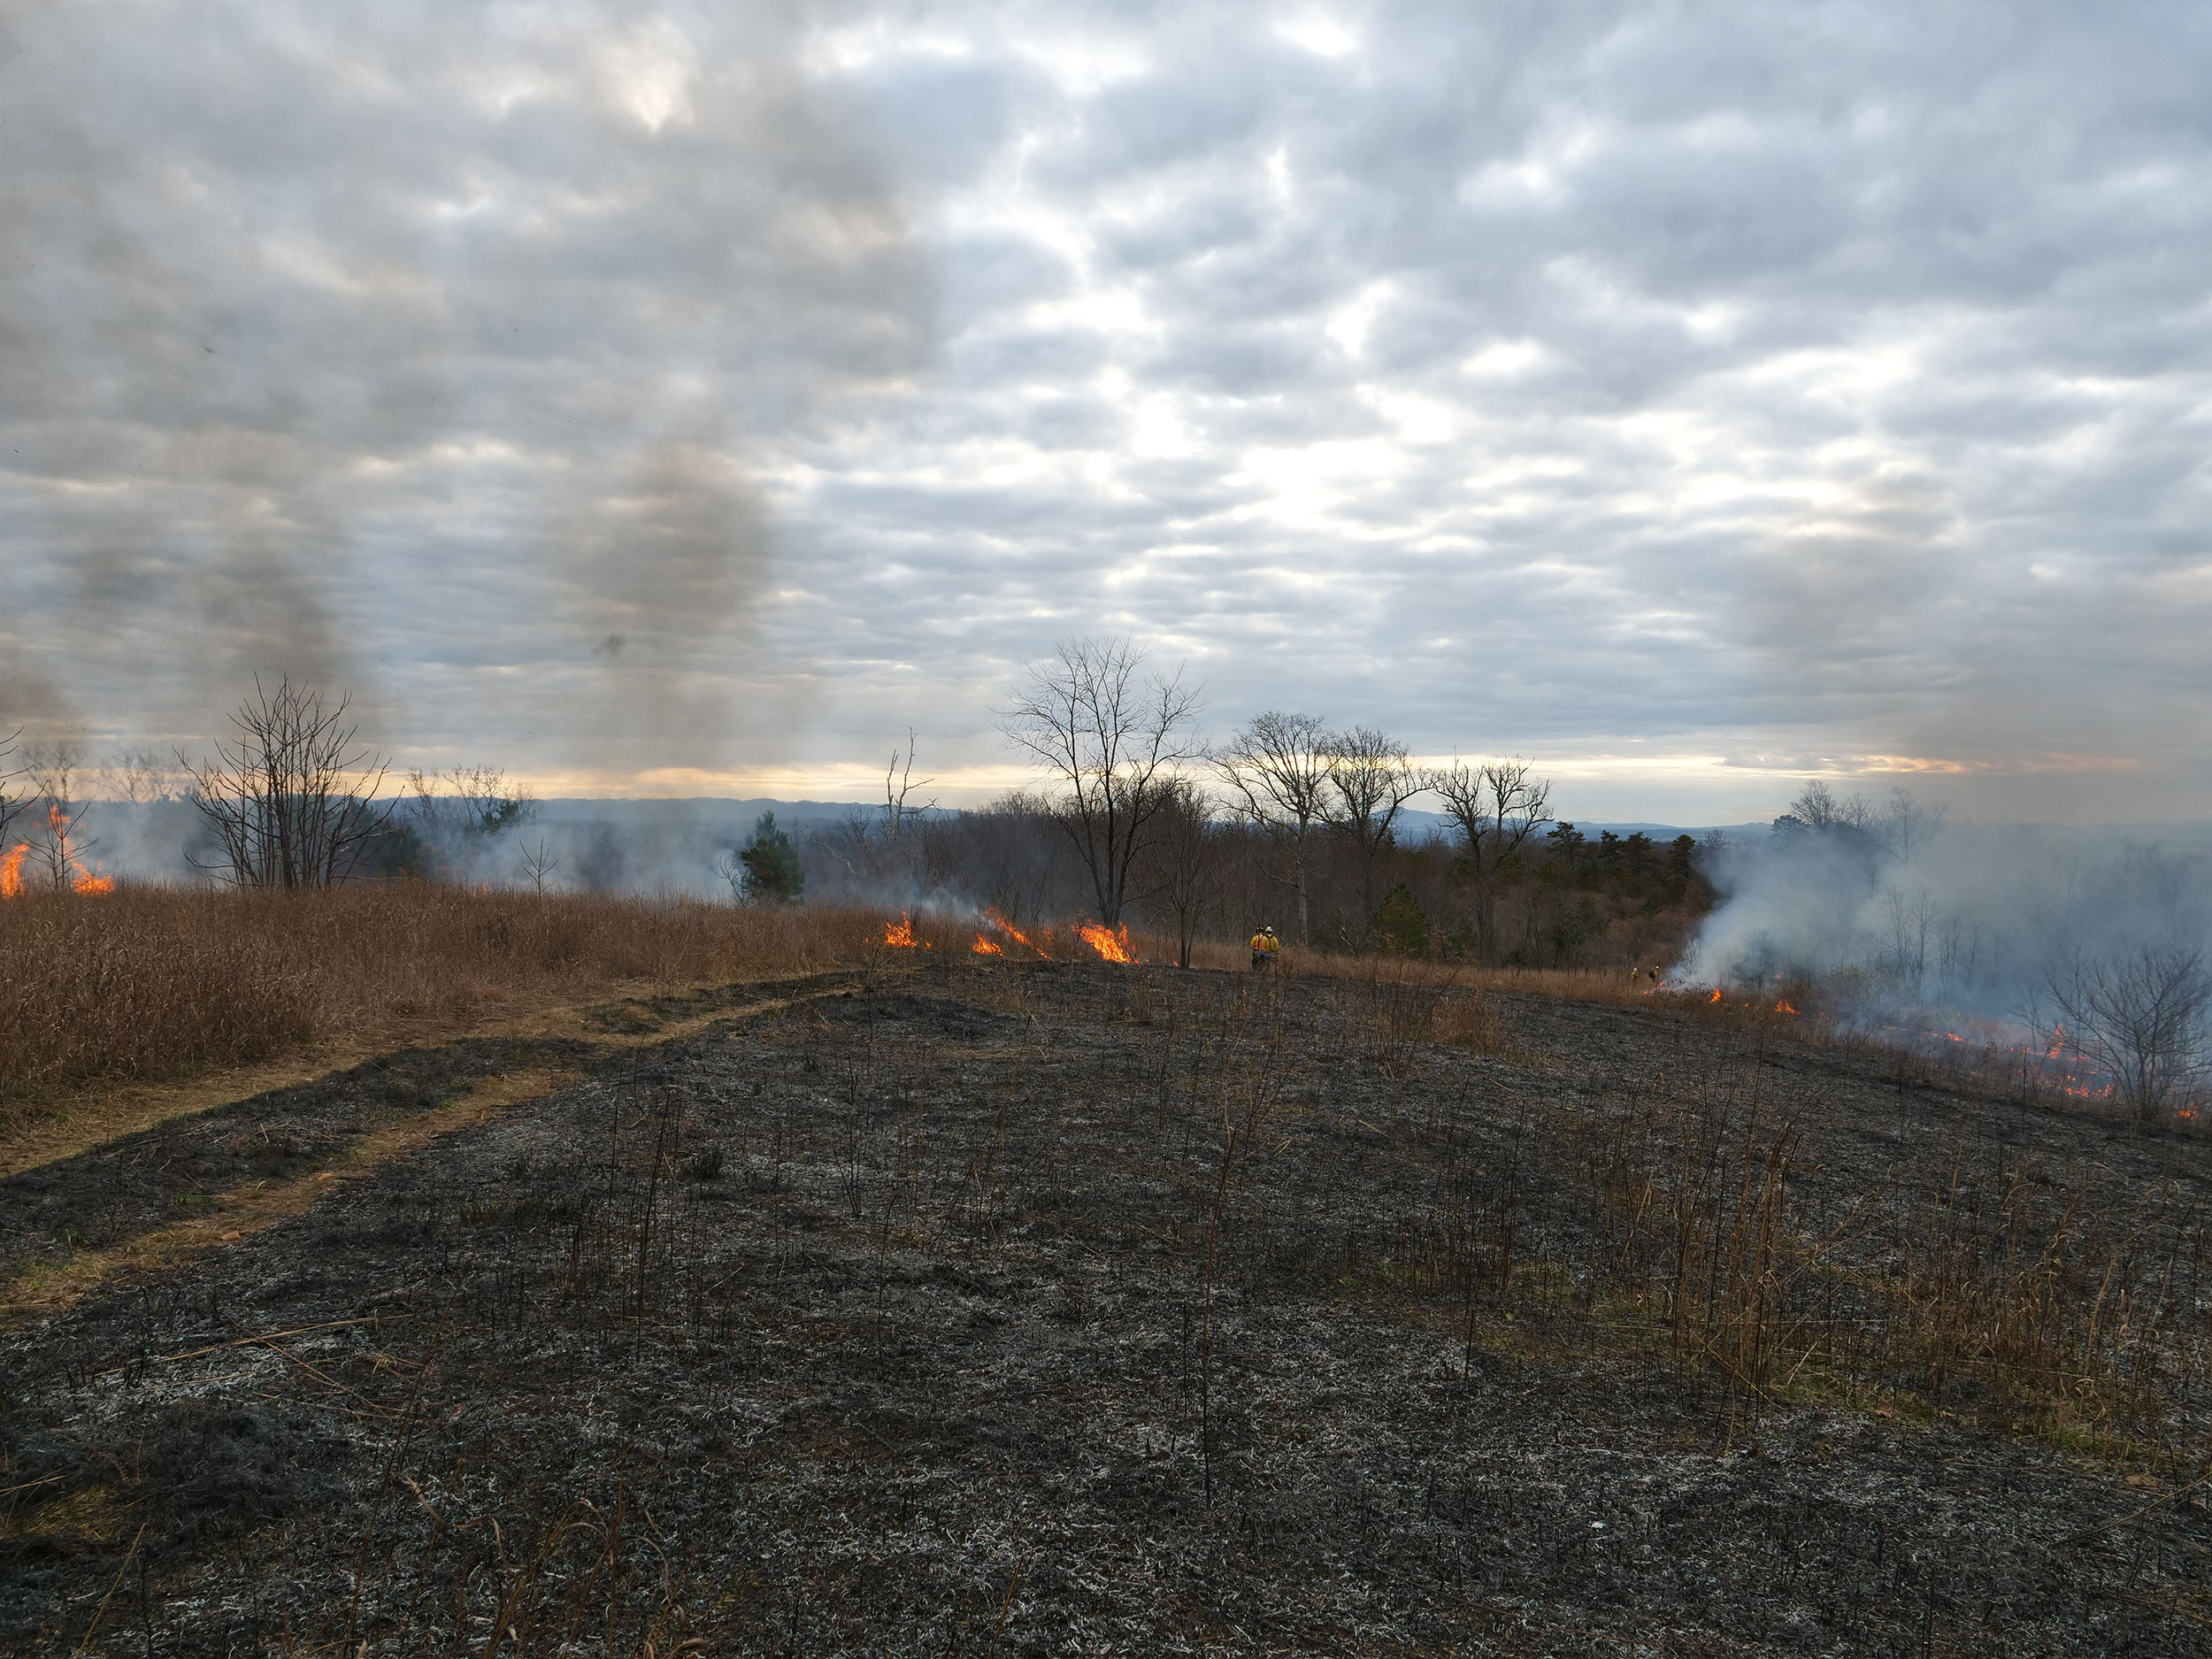 This burn was designed to maintain and improve wildlife habitat. The black and white ash seen in this photo serves as a supply of nutrients for regrowth of grasses and herbaceous plants